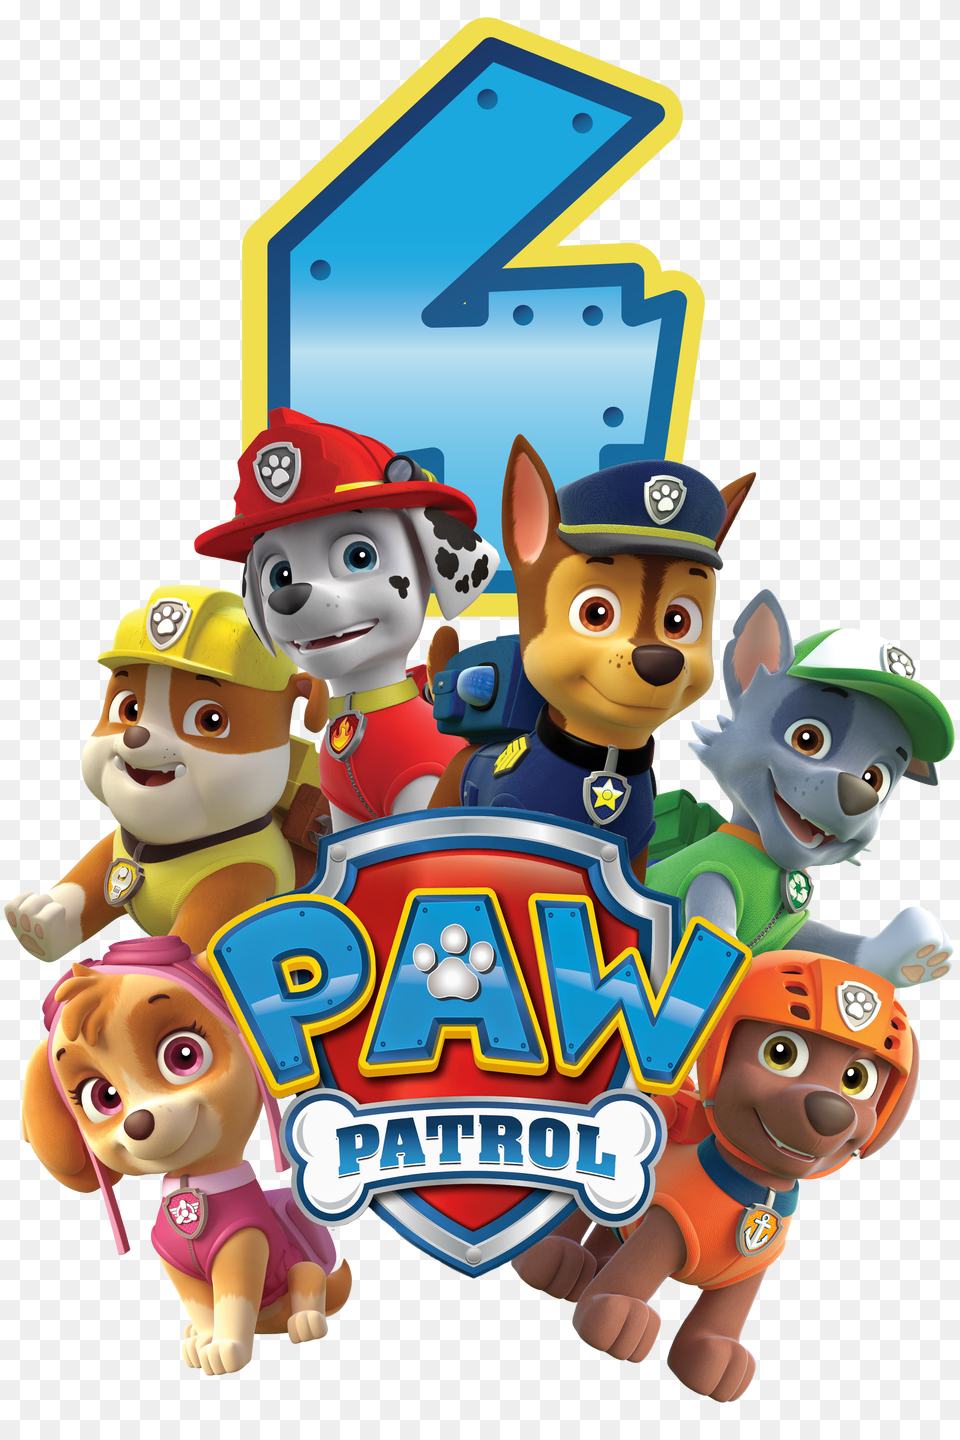 Library Of Paw Patrol Imagenes Graphic Paw Patrol 3rd Birthday Png Image